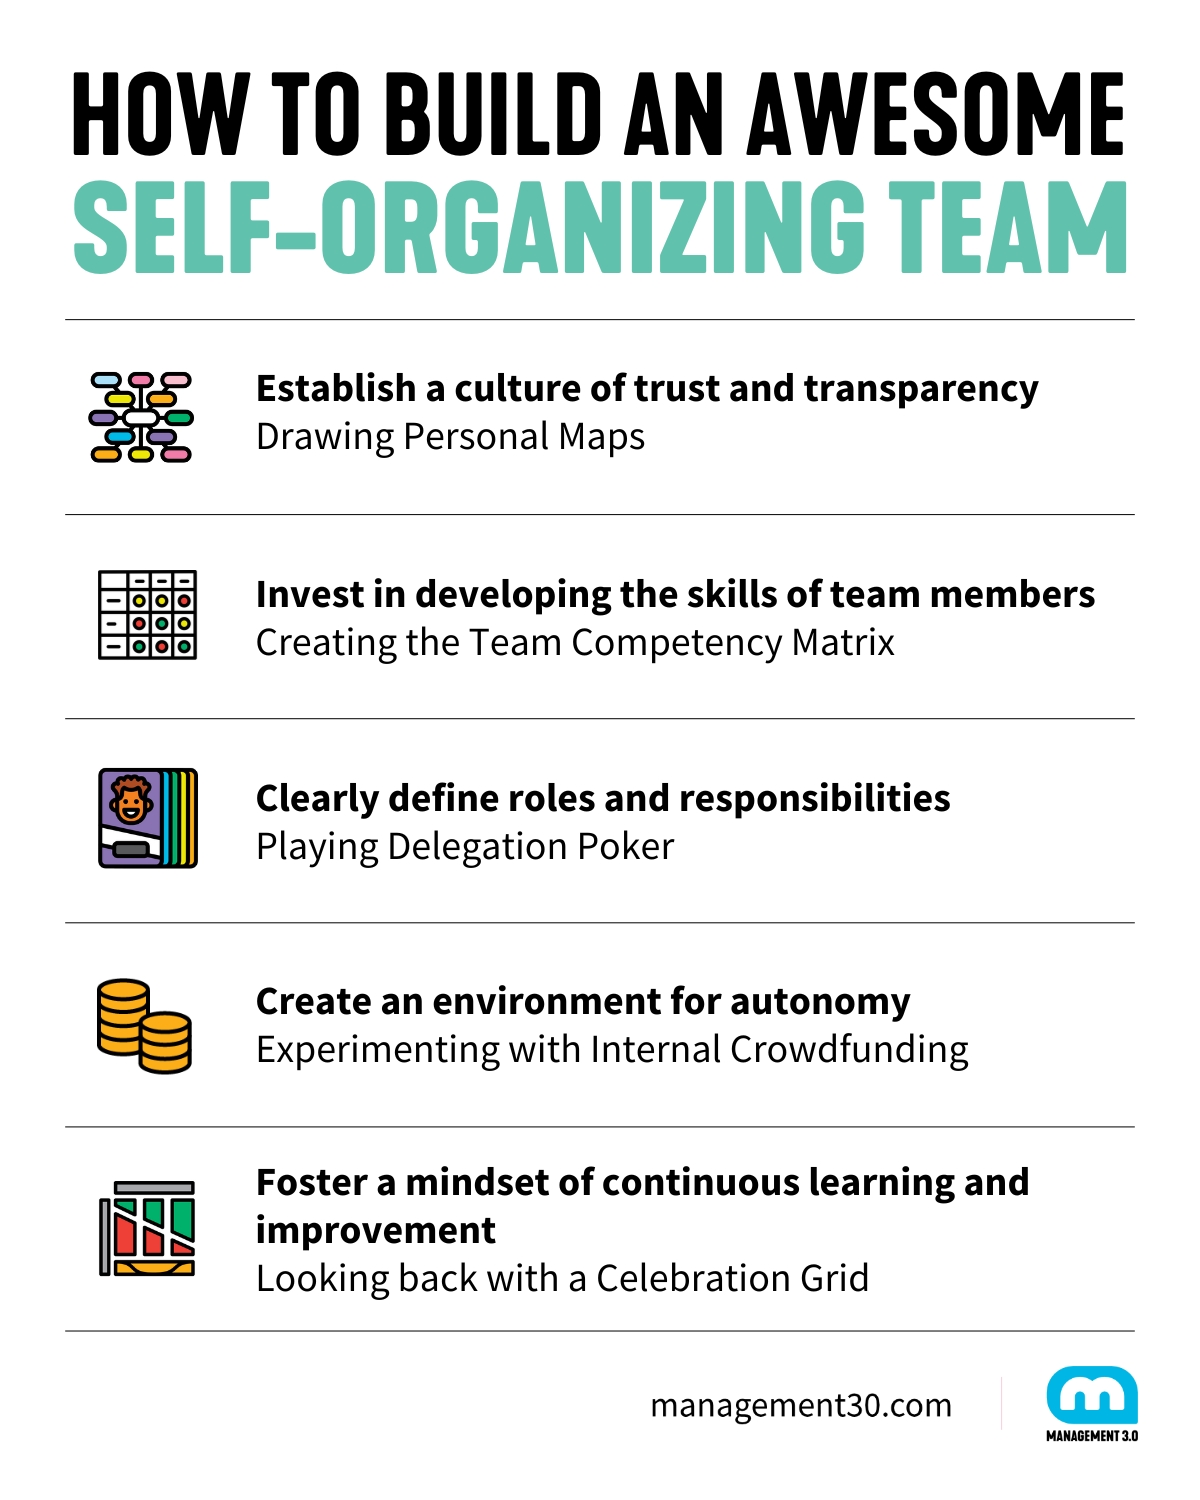 How to build a great self-organizing team